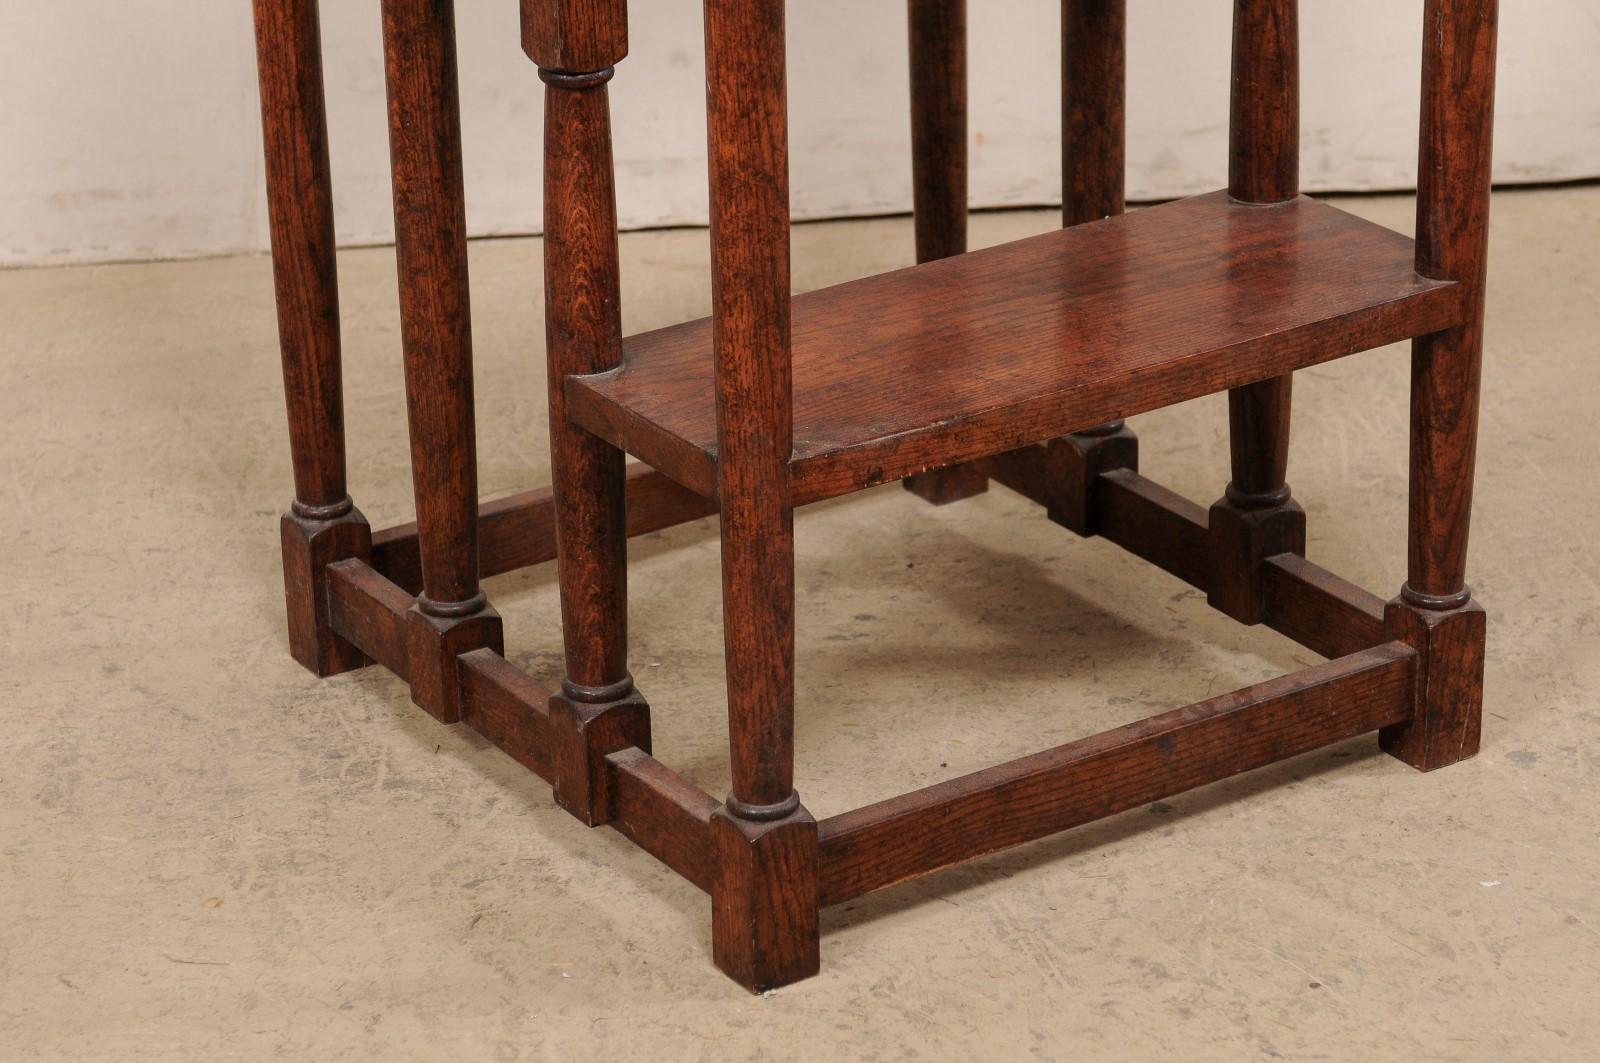 20th Century English Carved-Wood Library Step Ladder Would Also Be a Great Kitchen Piece